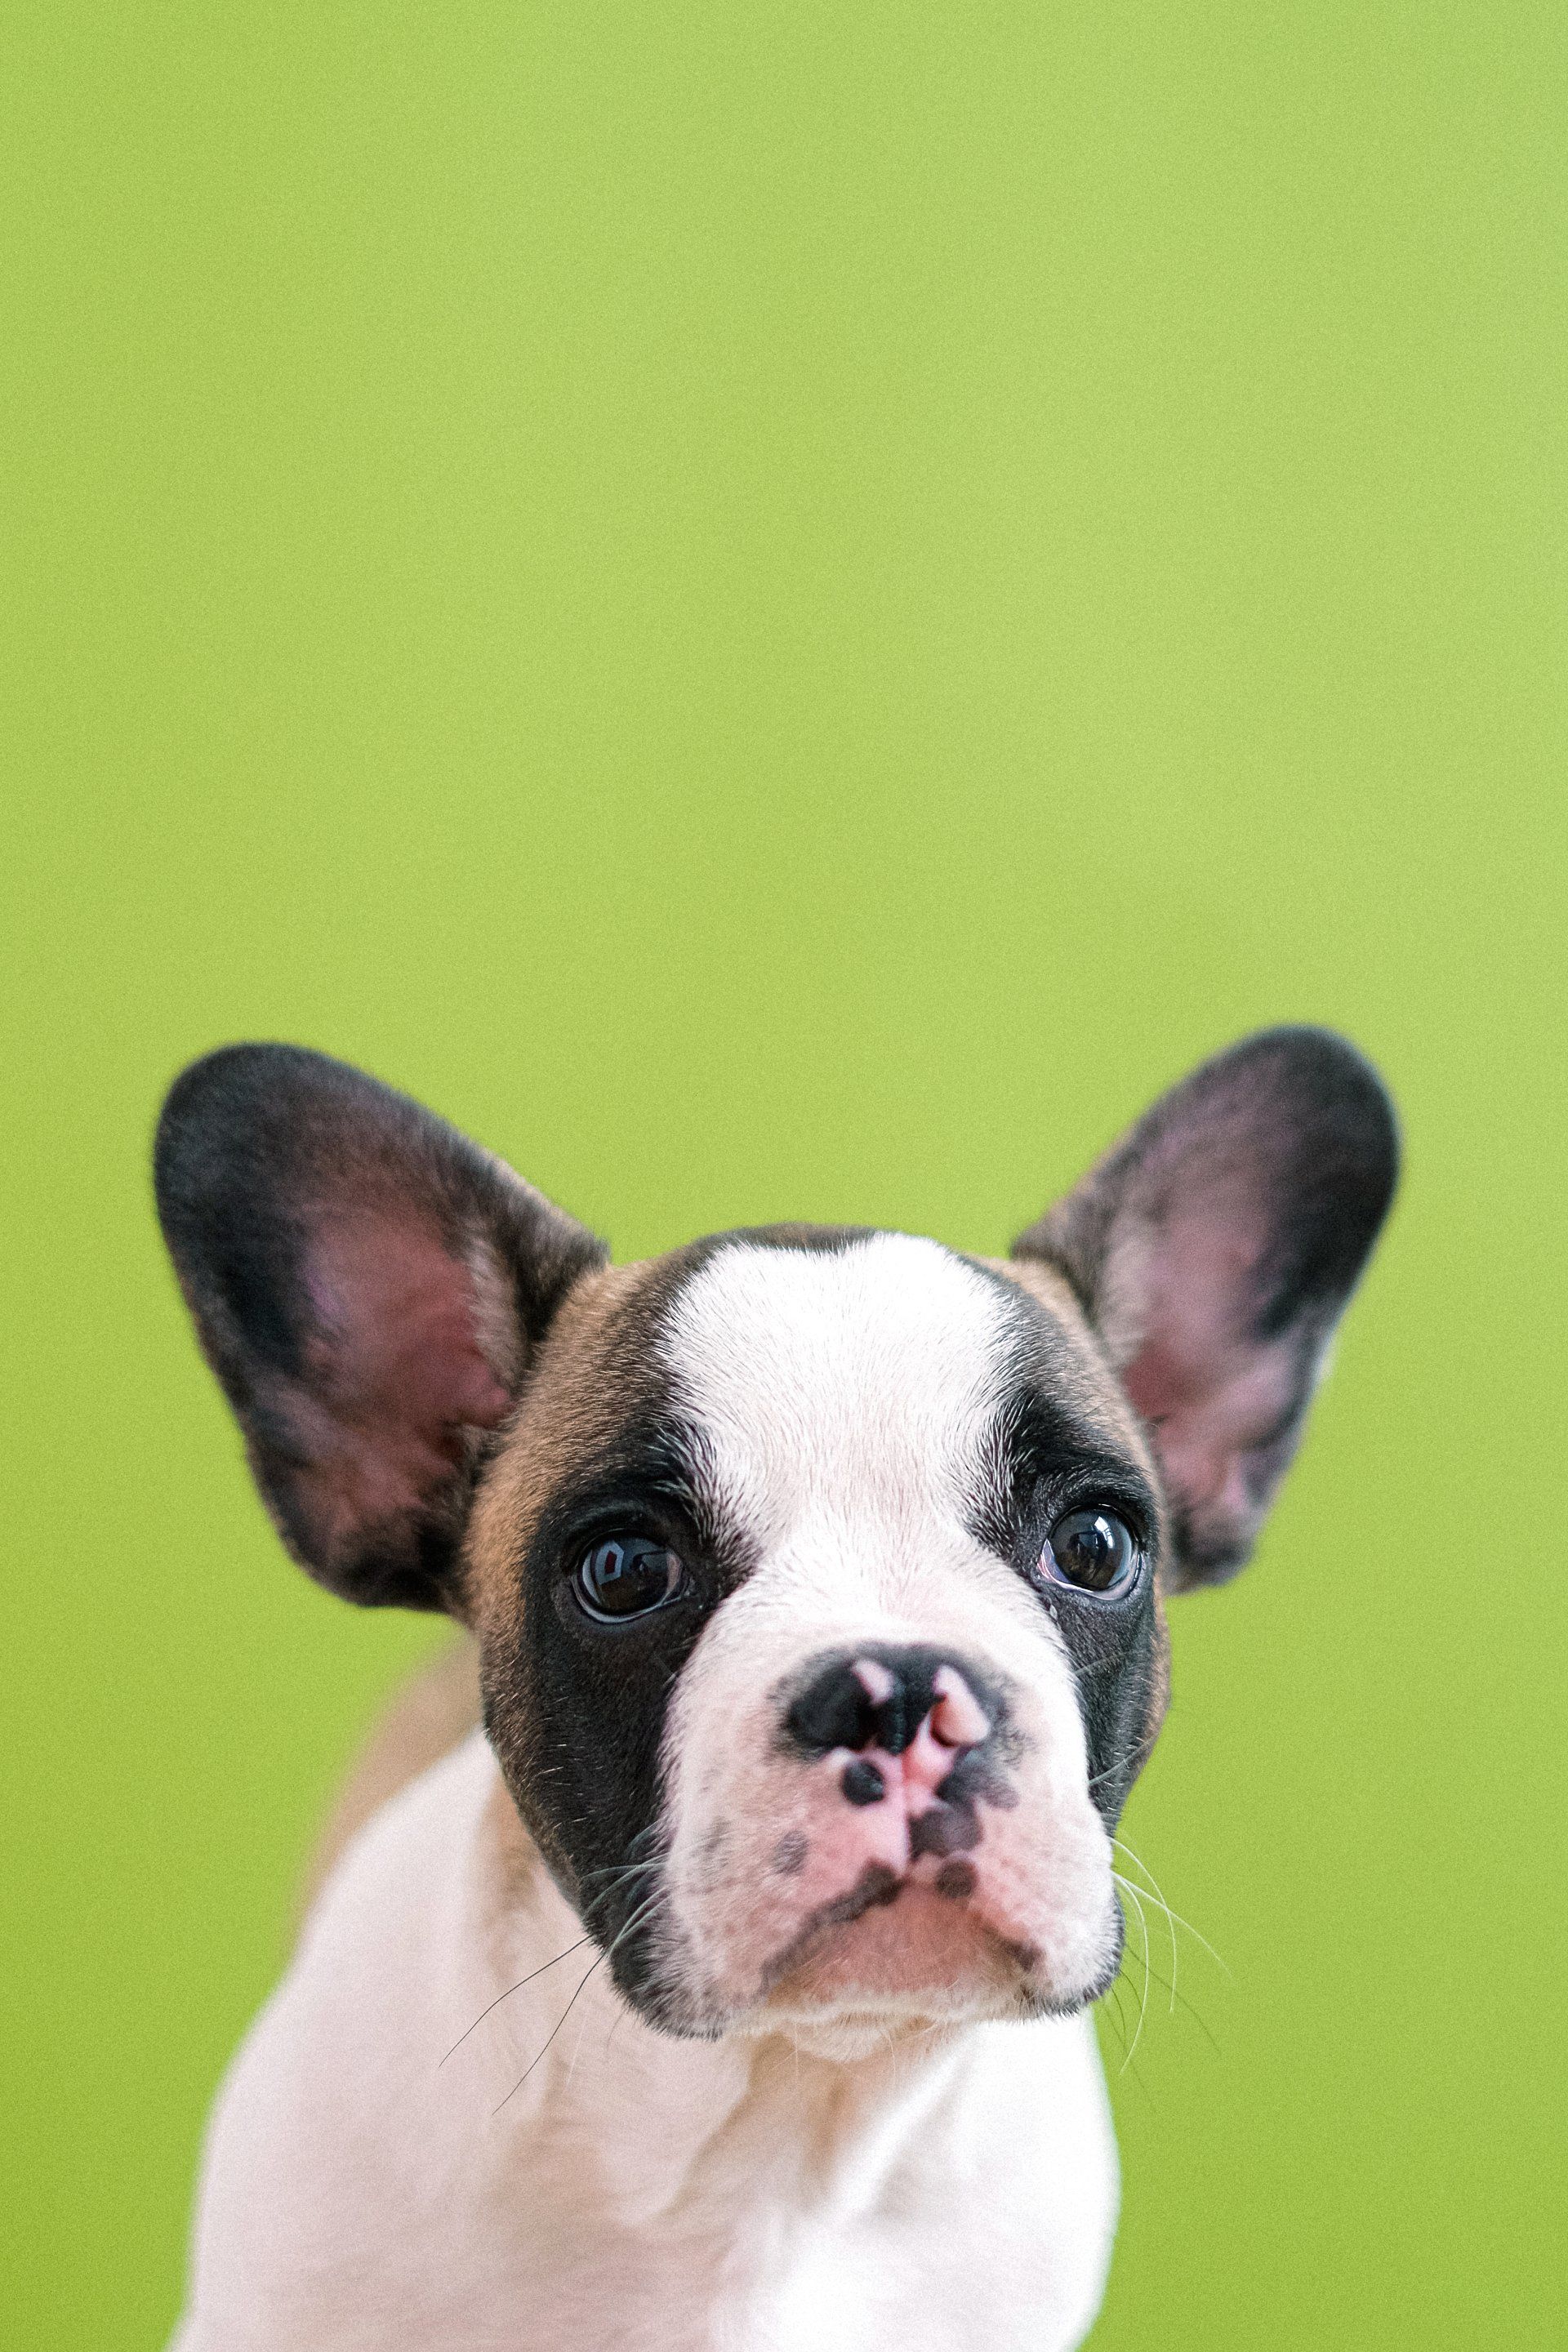 a brown and white french bulldog puppy is looking at the camera on a green background .